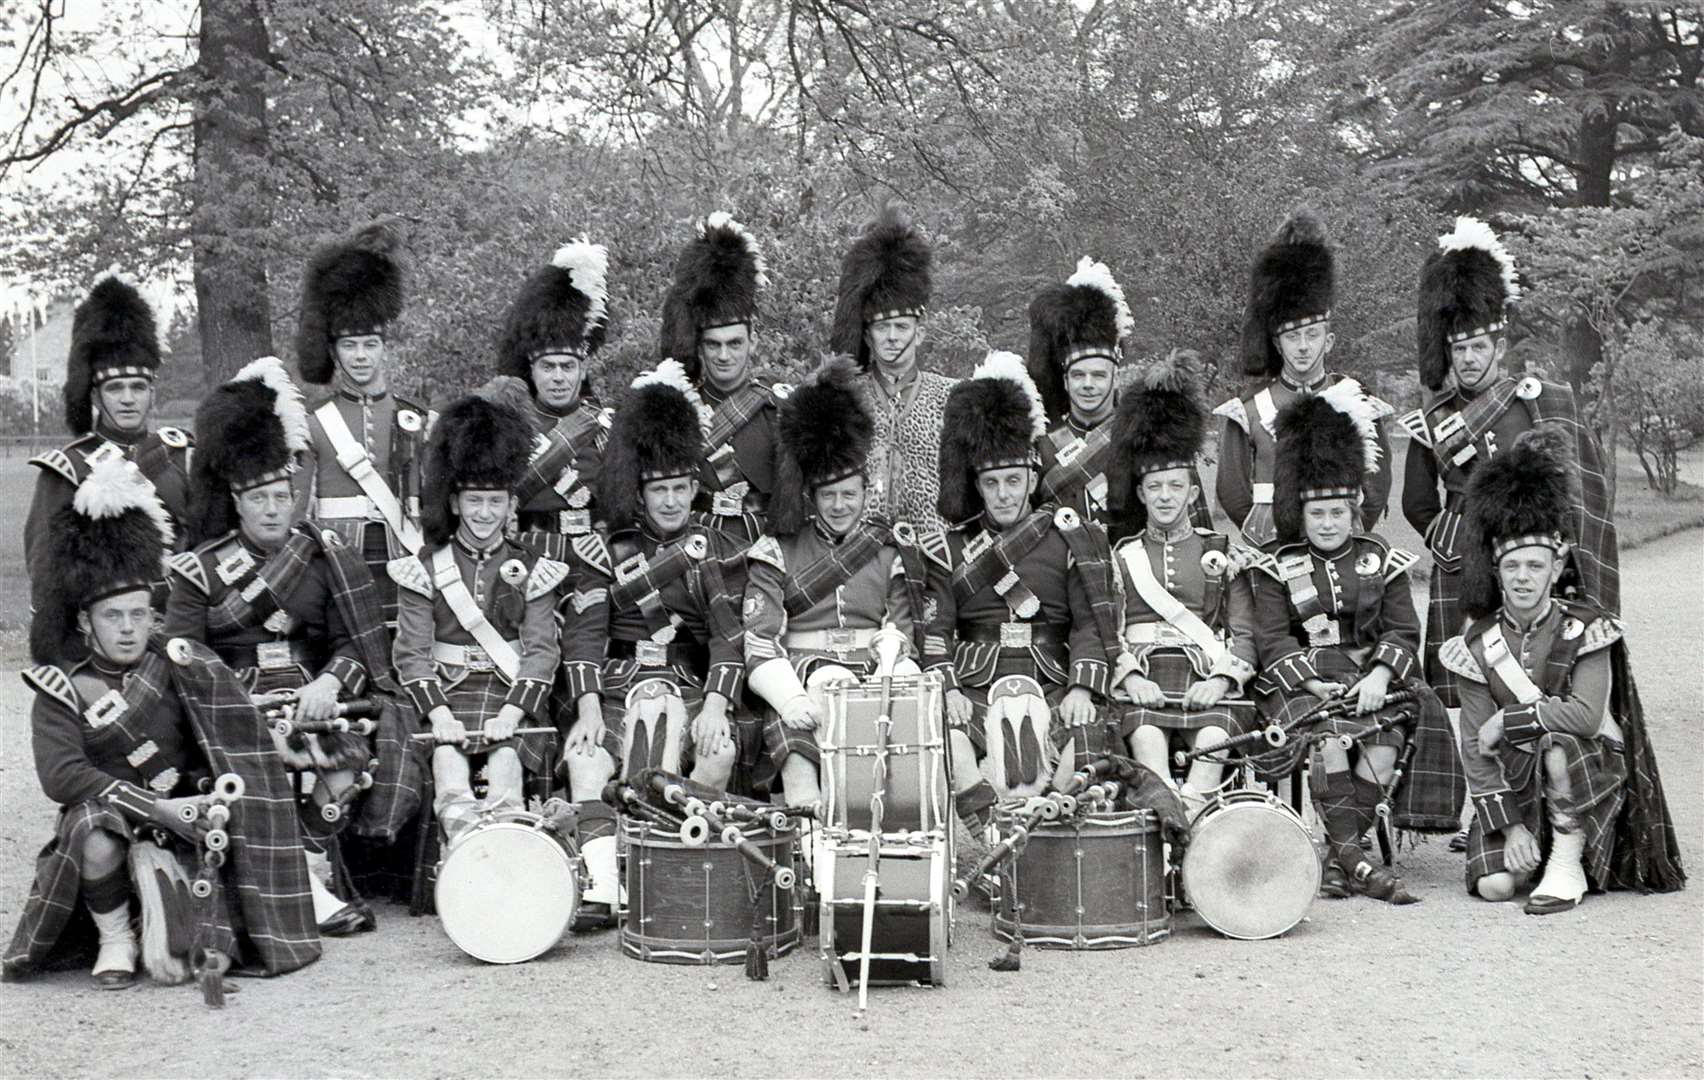 Forres Pipe Band at Grant Park, 1955.